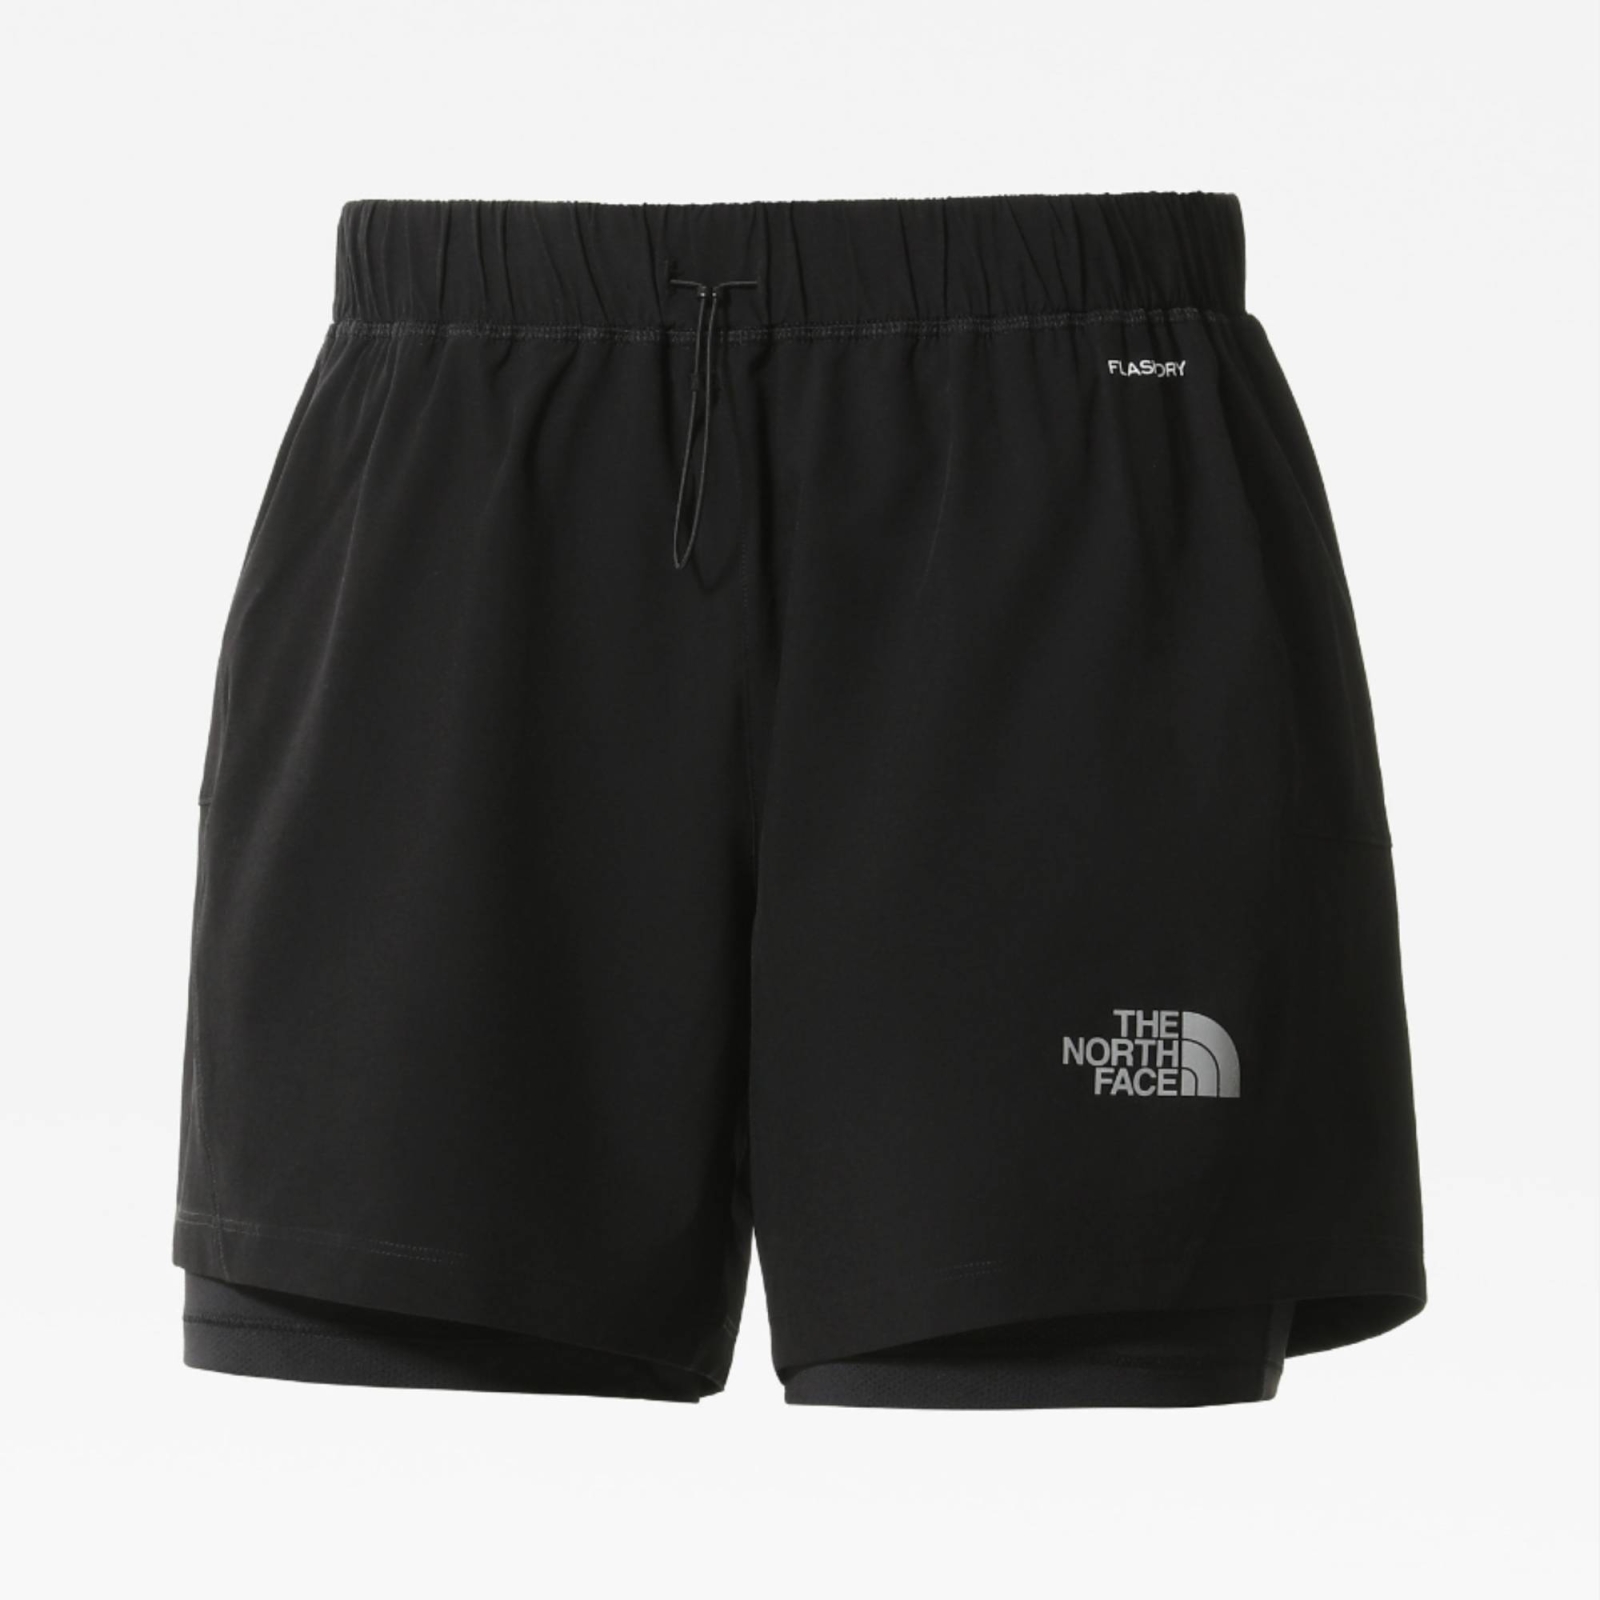 THE NORTHFACE WOMENS 2 IN 1 SHORTS